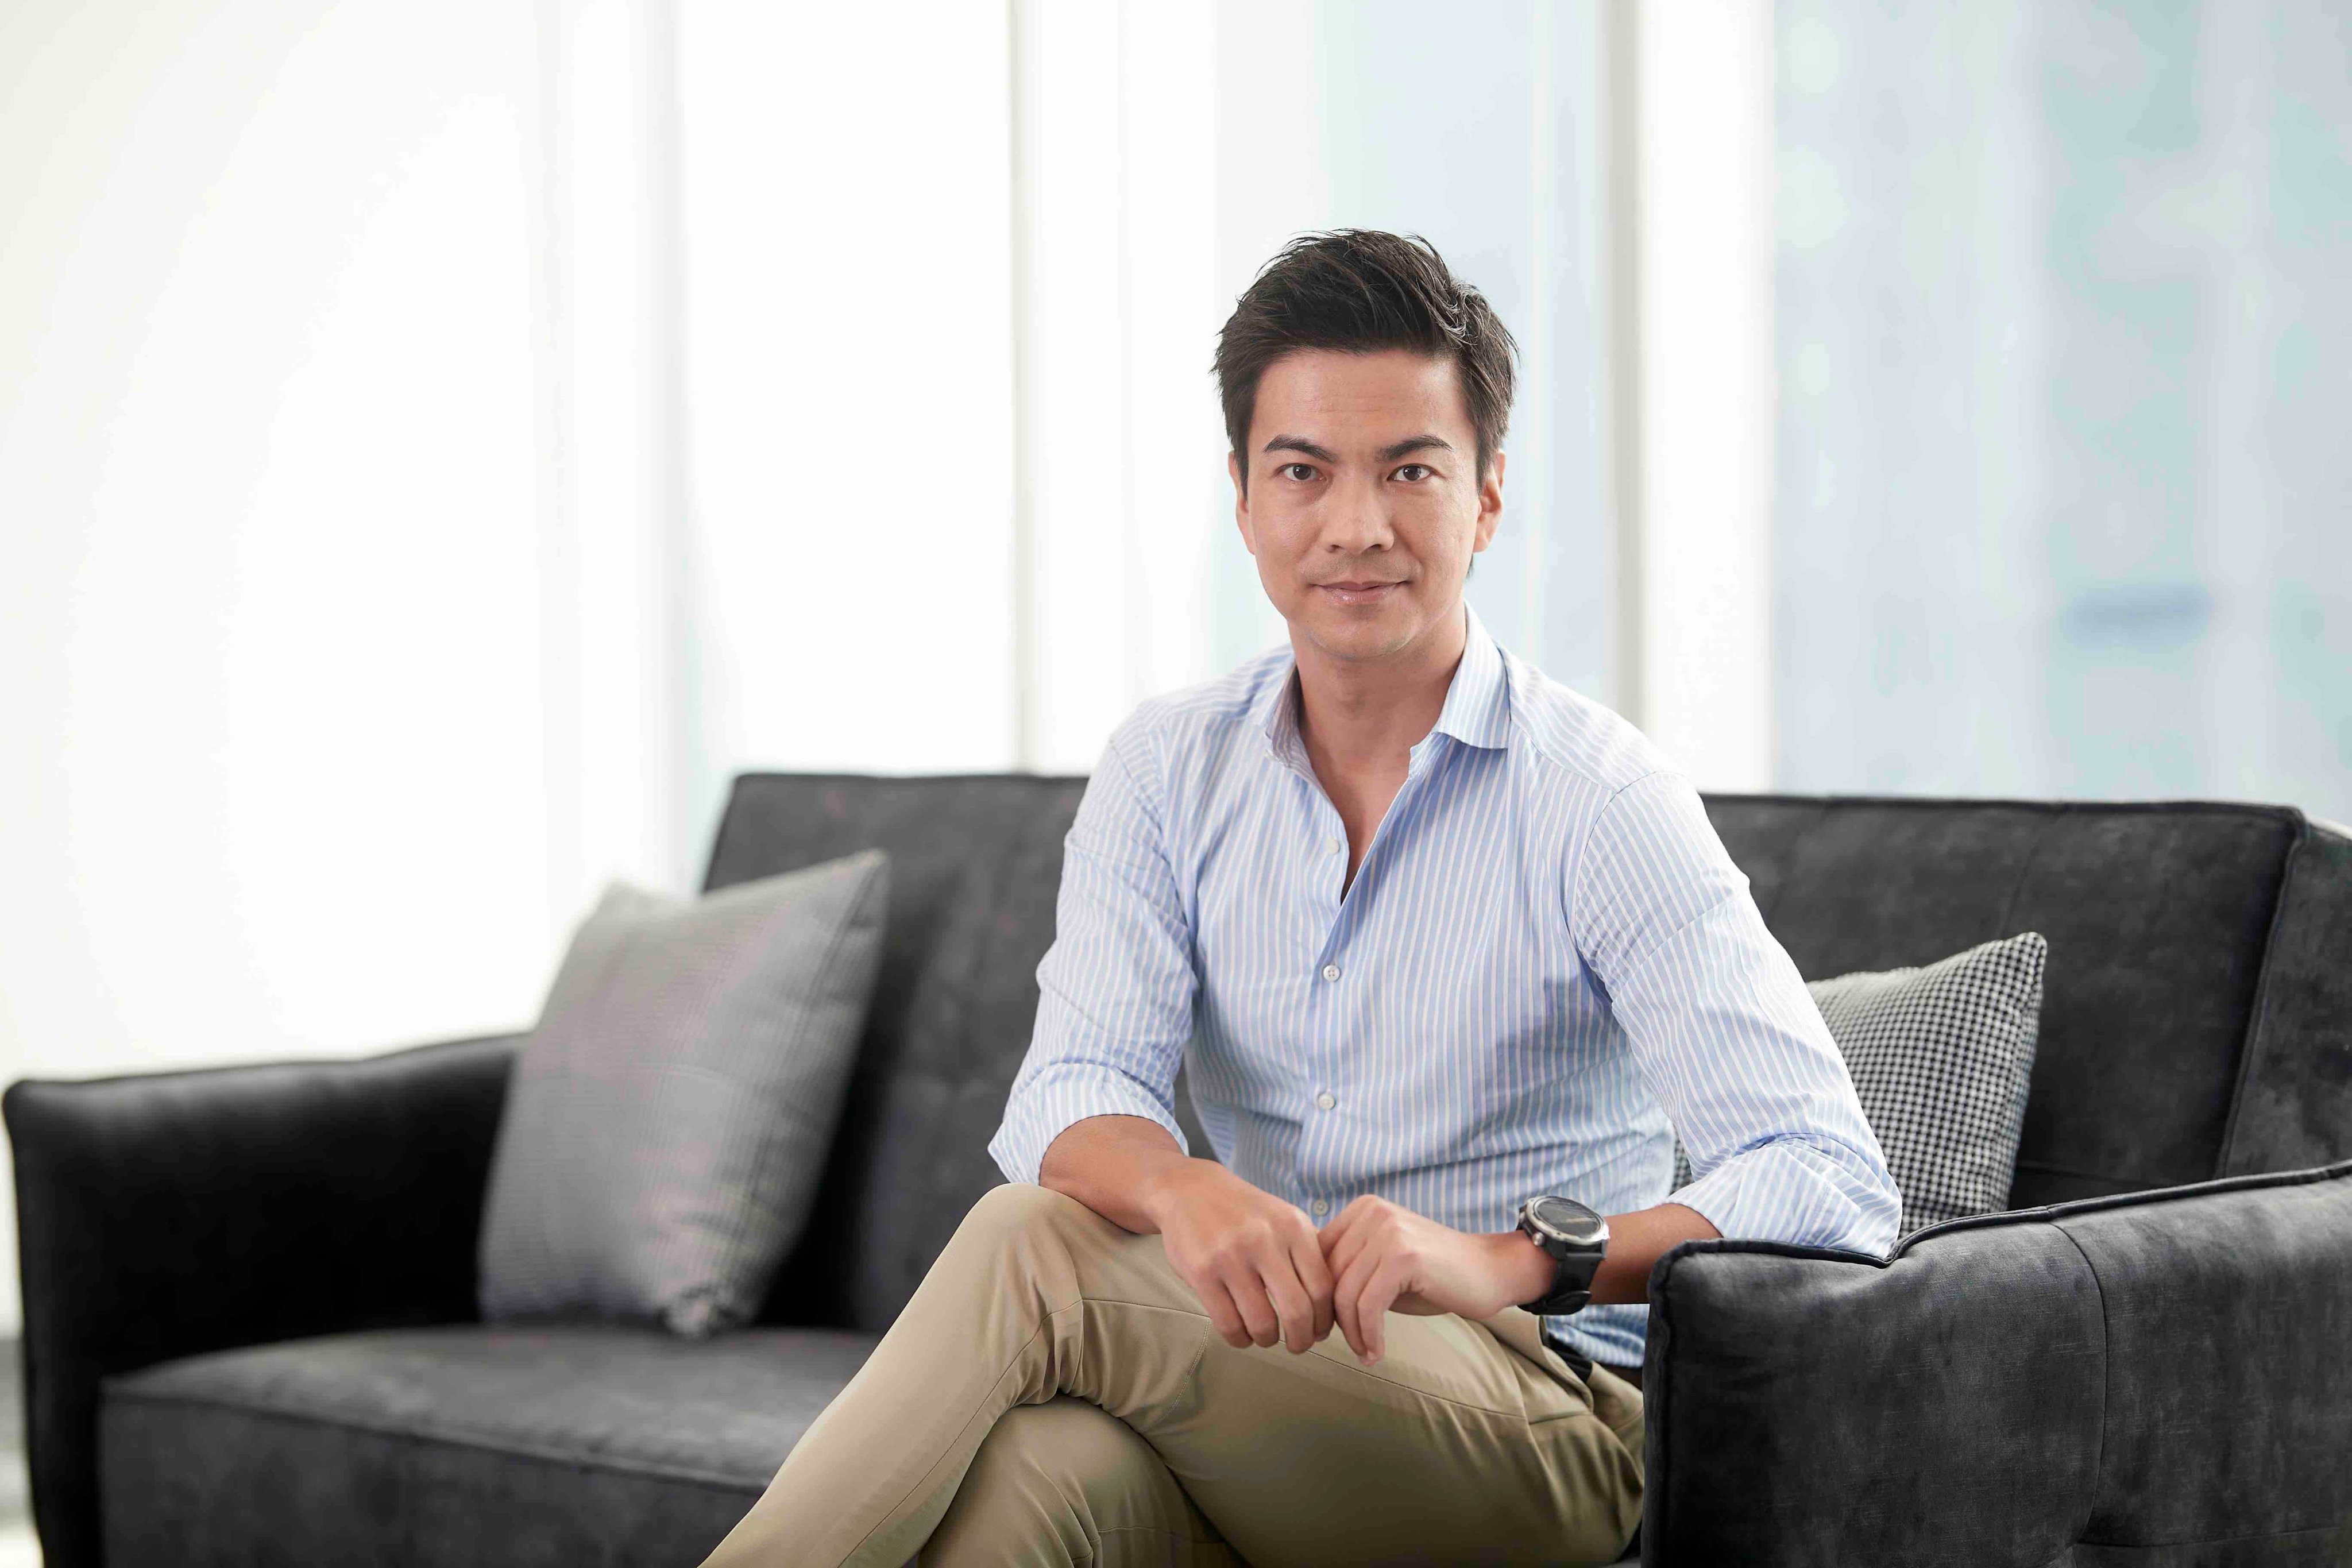 Lazada CEO James Dong has been tapped as the new chief executive of Daraz Group, another online shopping platform owned by Alibaba Group Holding that serves South Asia, as the China’s e-commerce giant seeks to fend off rising competition. Photo: Handout